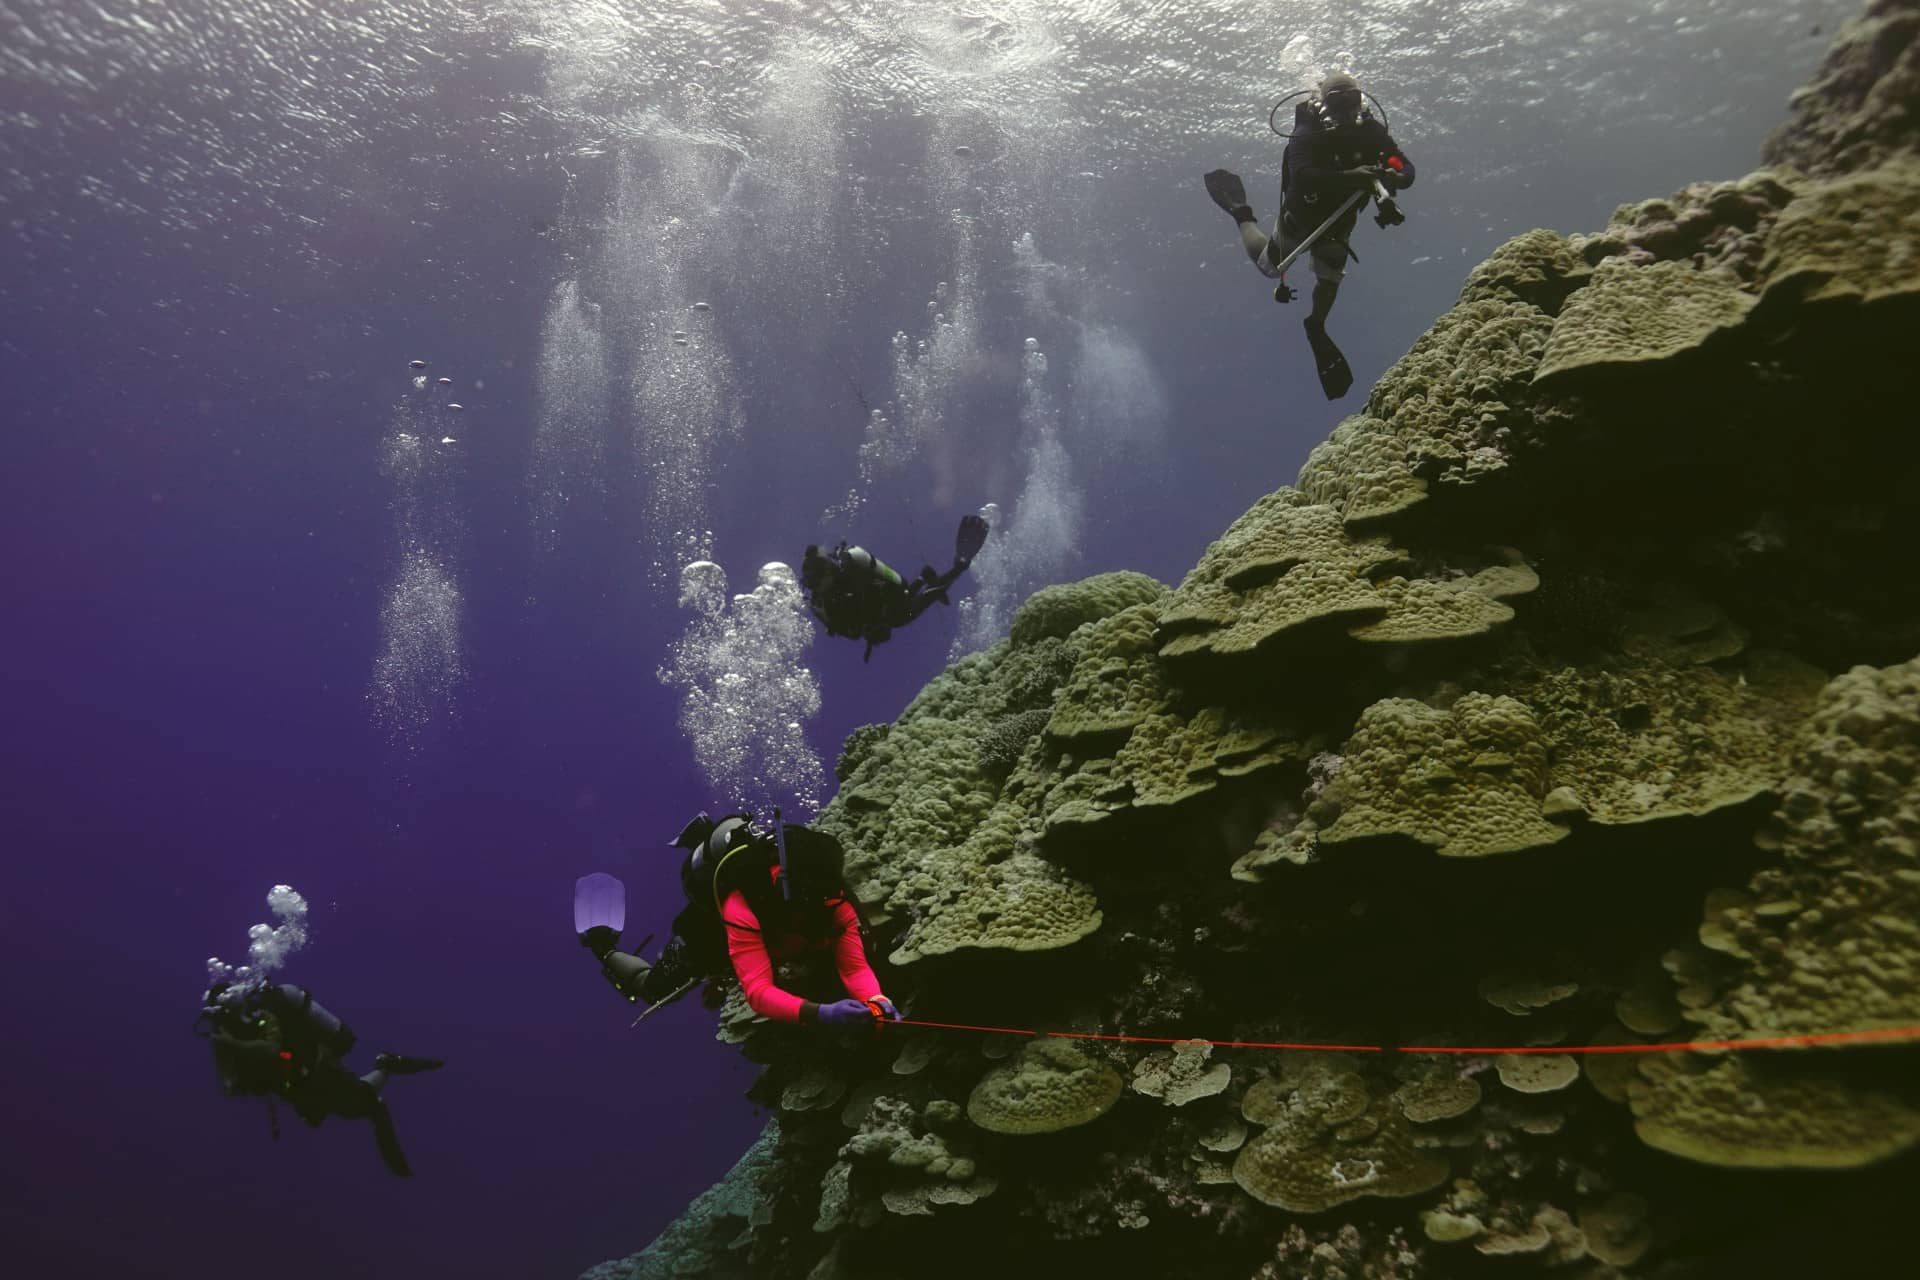 UOG professor, students join exploration to understand corals that have withstood sea warming.